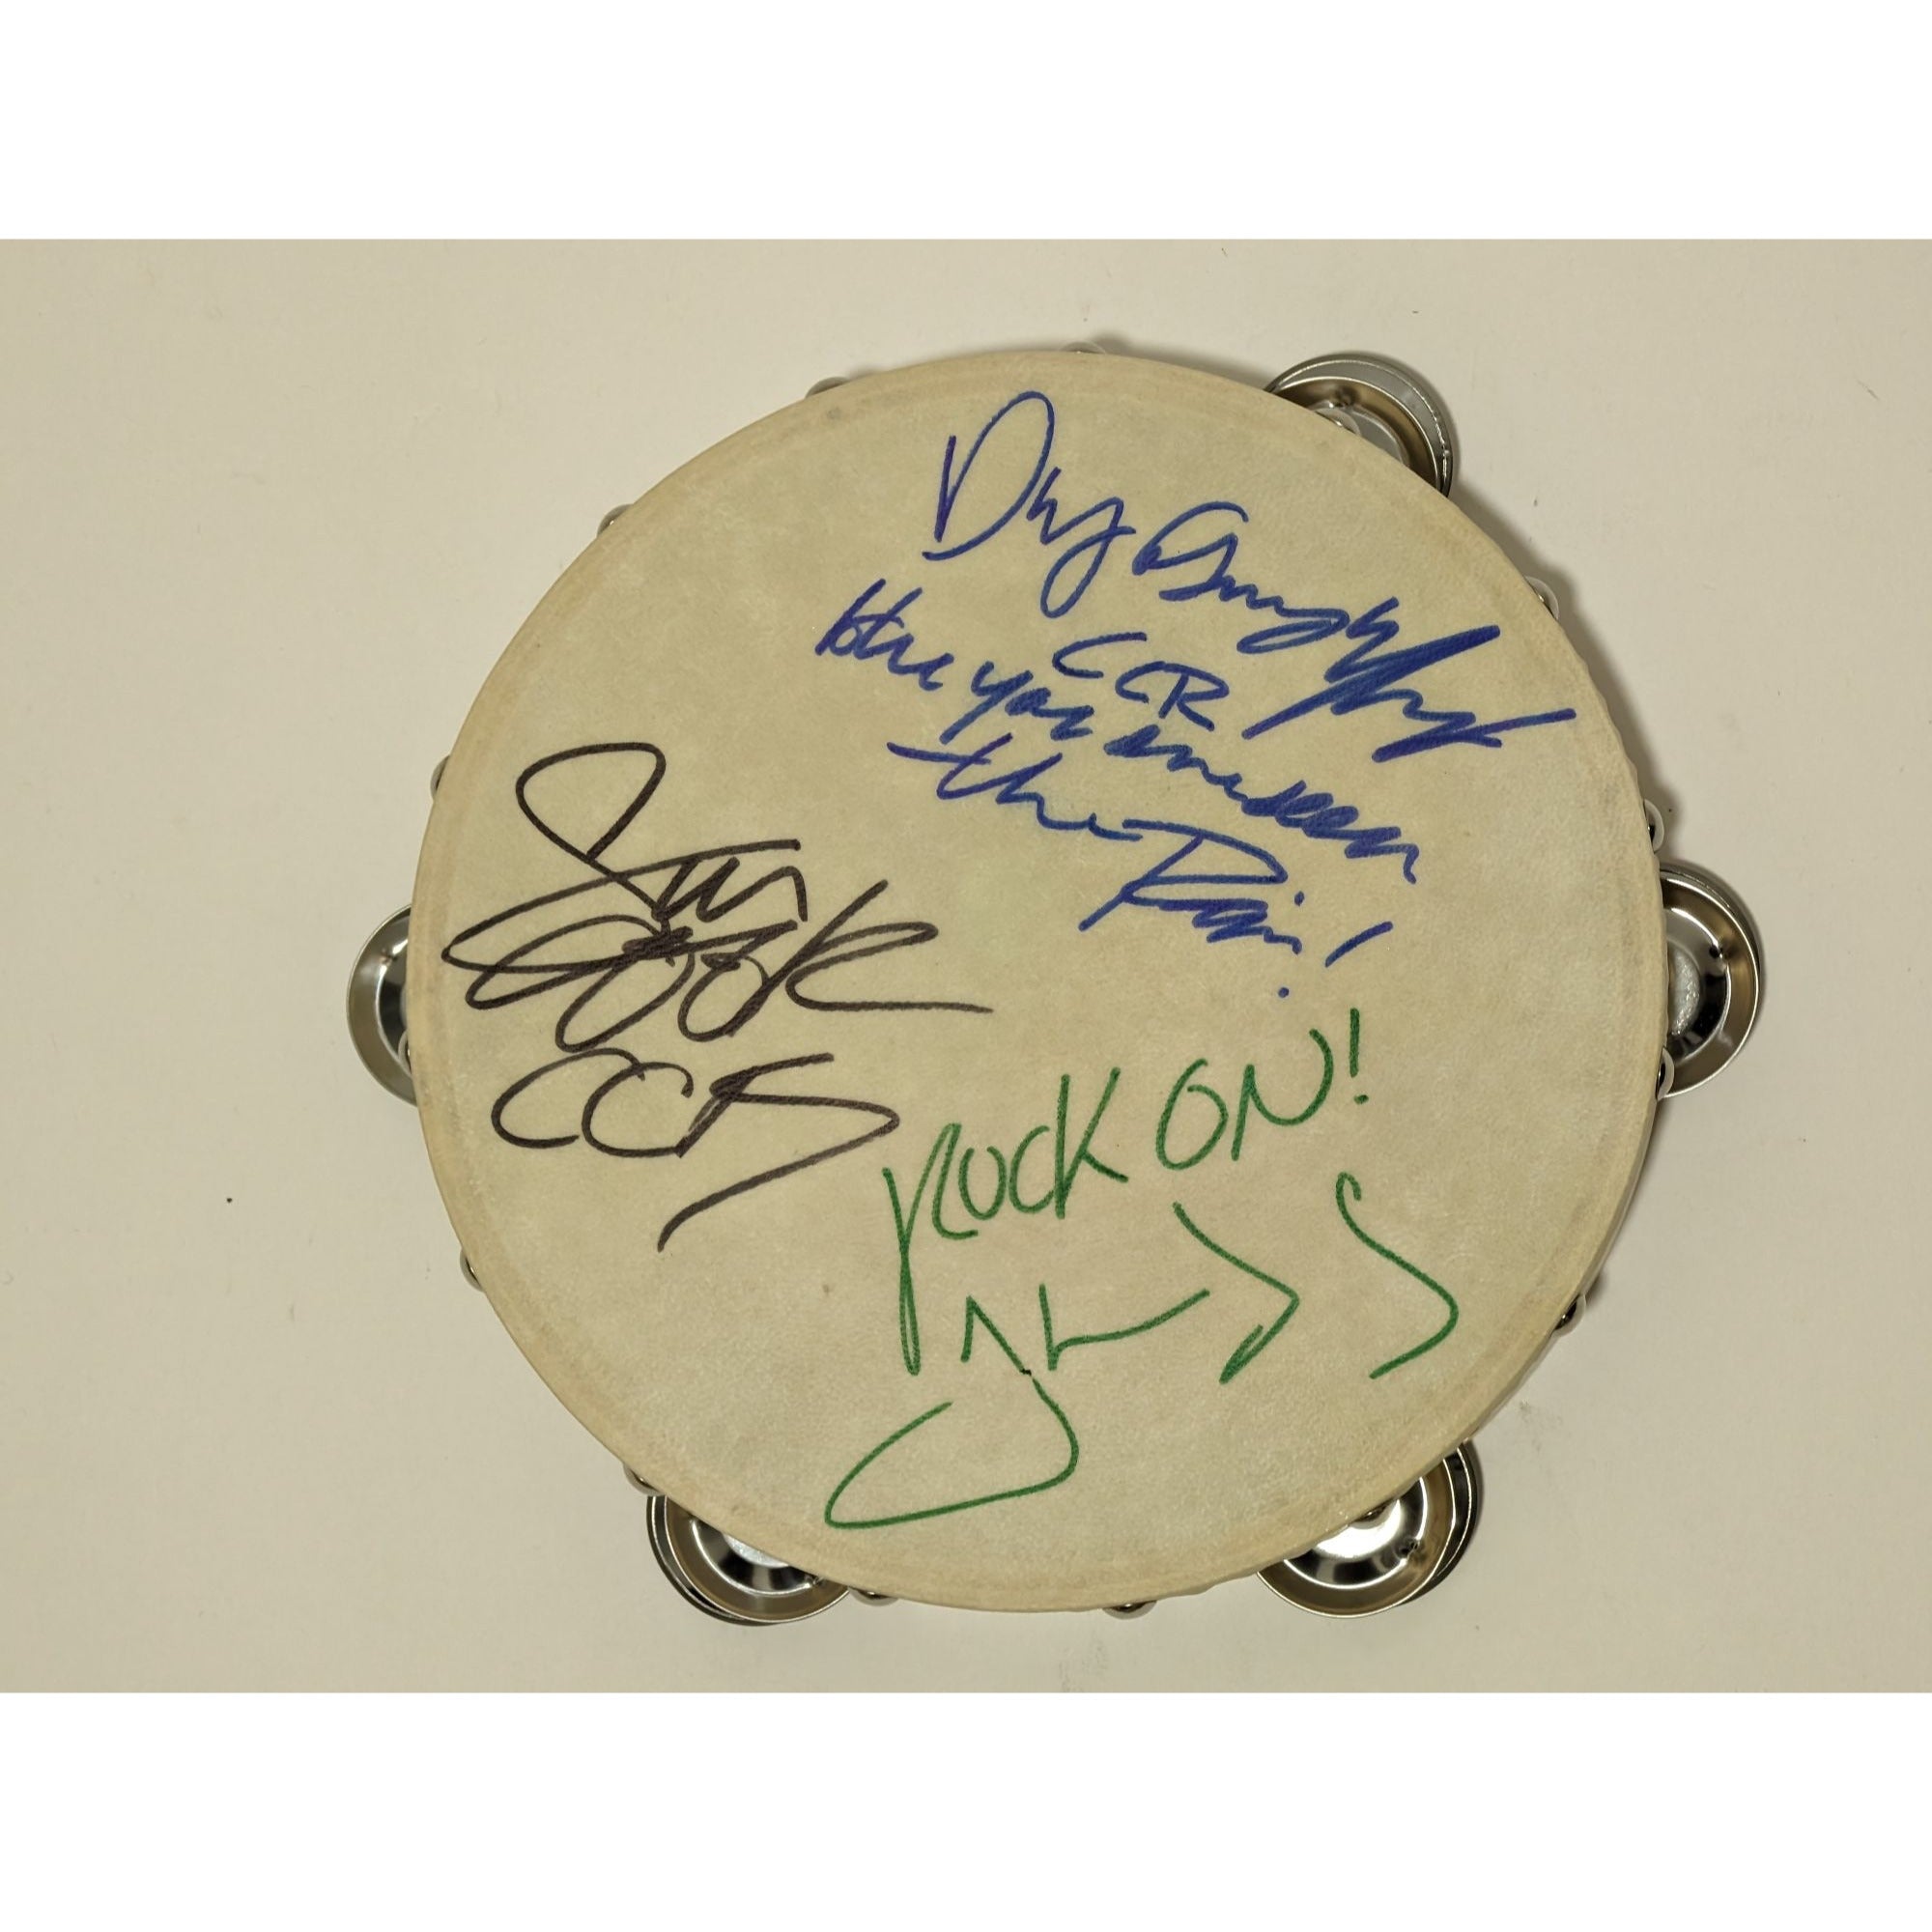 Credence Clearwater Revival CCR John Fogerty Stu Cook Doug Clifford 10inch' tambourine signed with proof